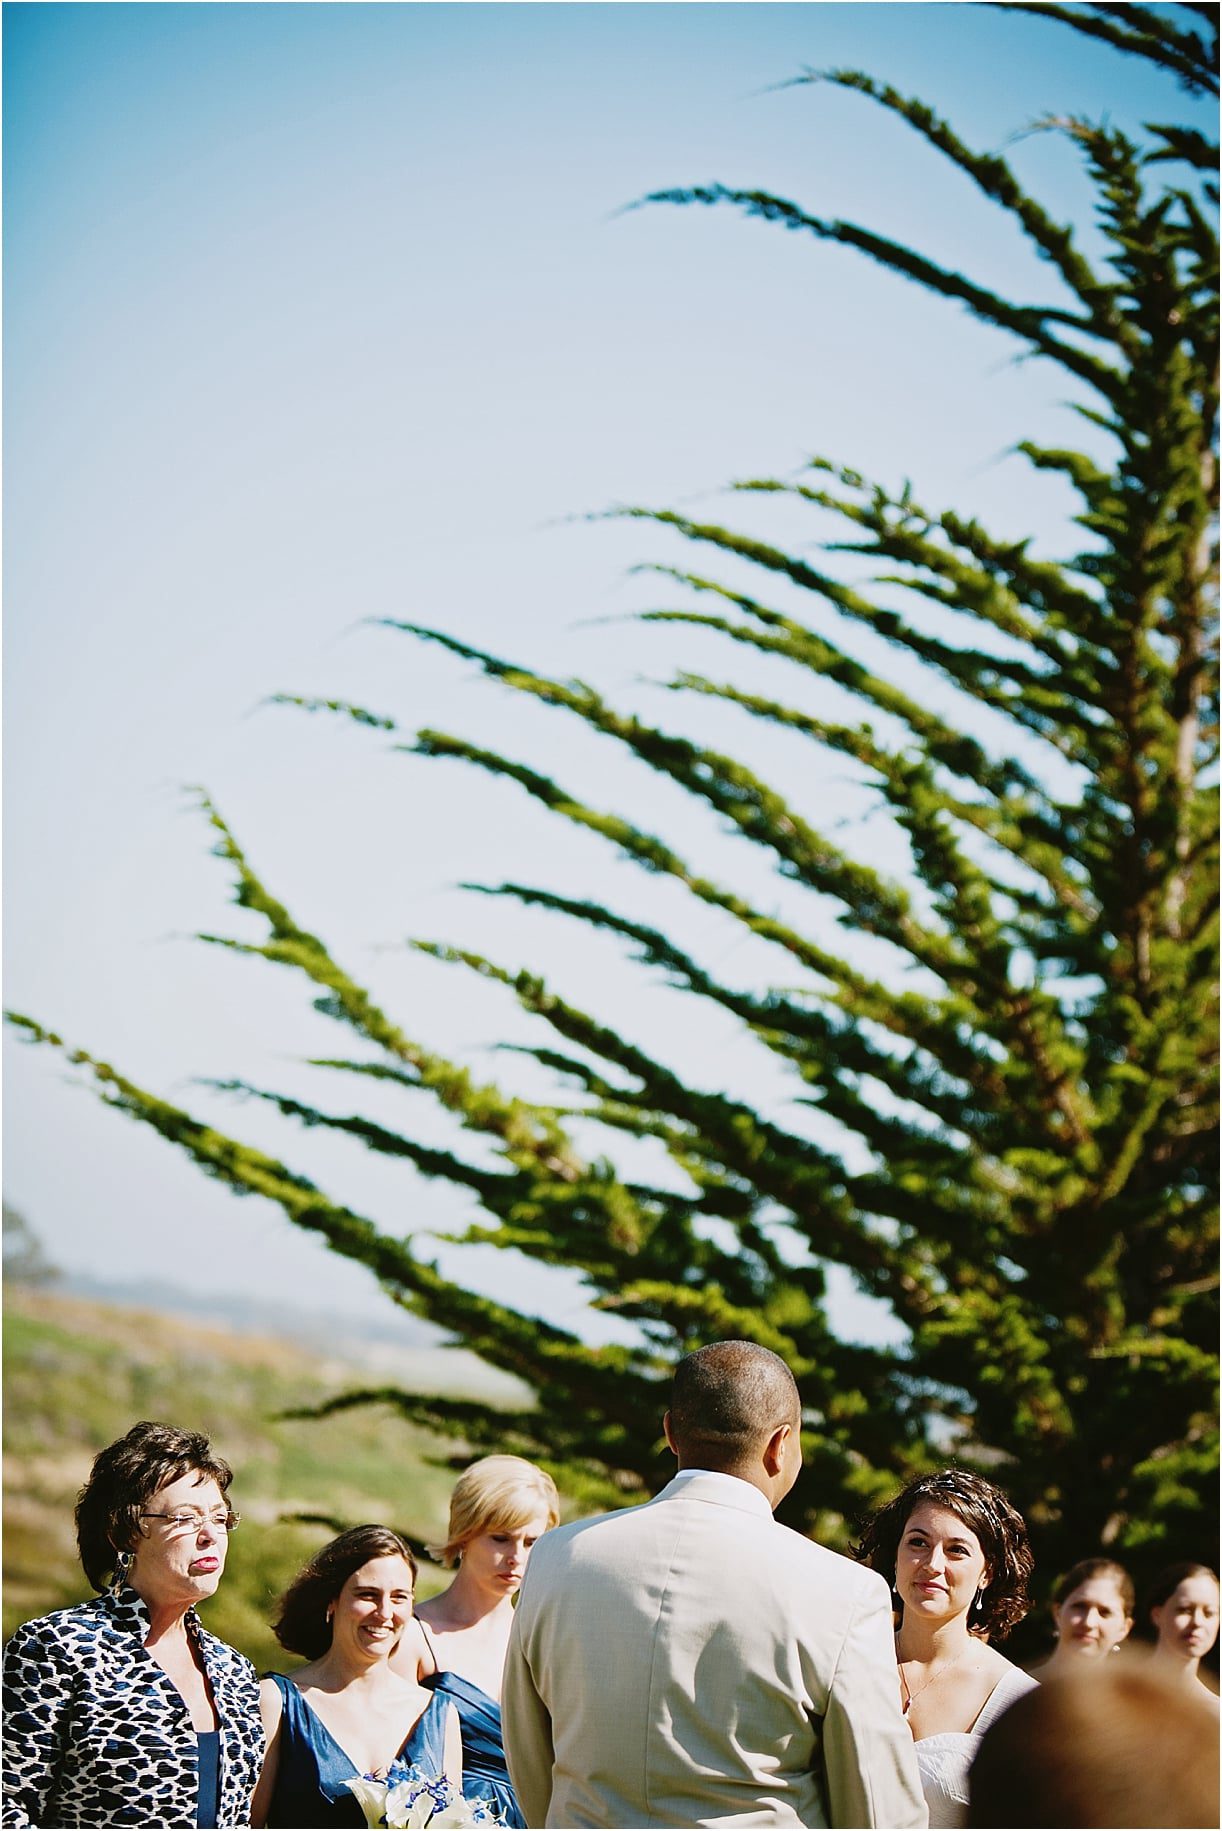 Unique California Venues in San Mateo County | Hill City Bride Virginia Wedding Blog - Costanoa Lodge by Jerry Yoon Photography